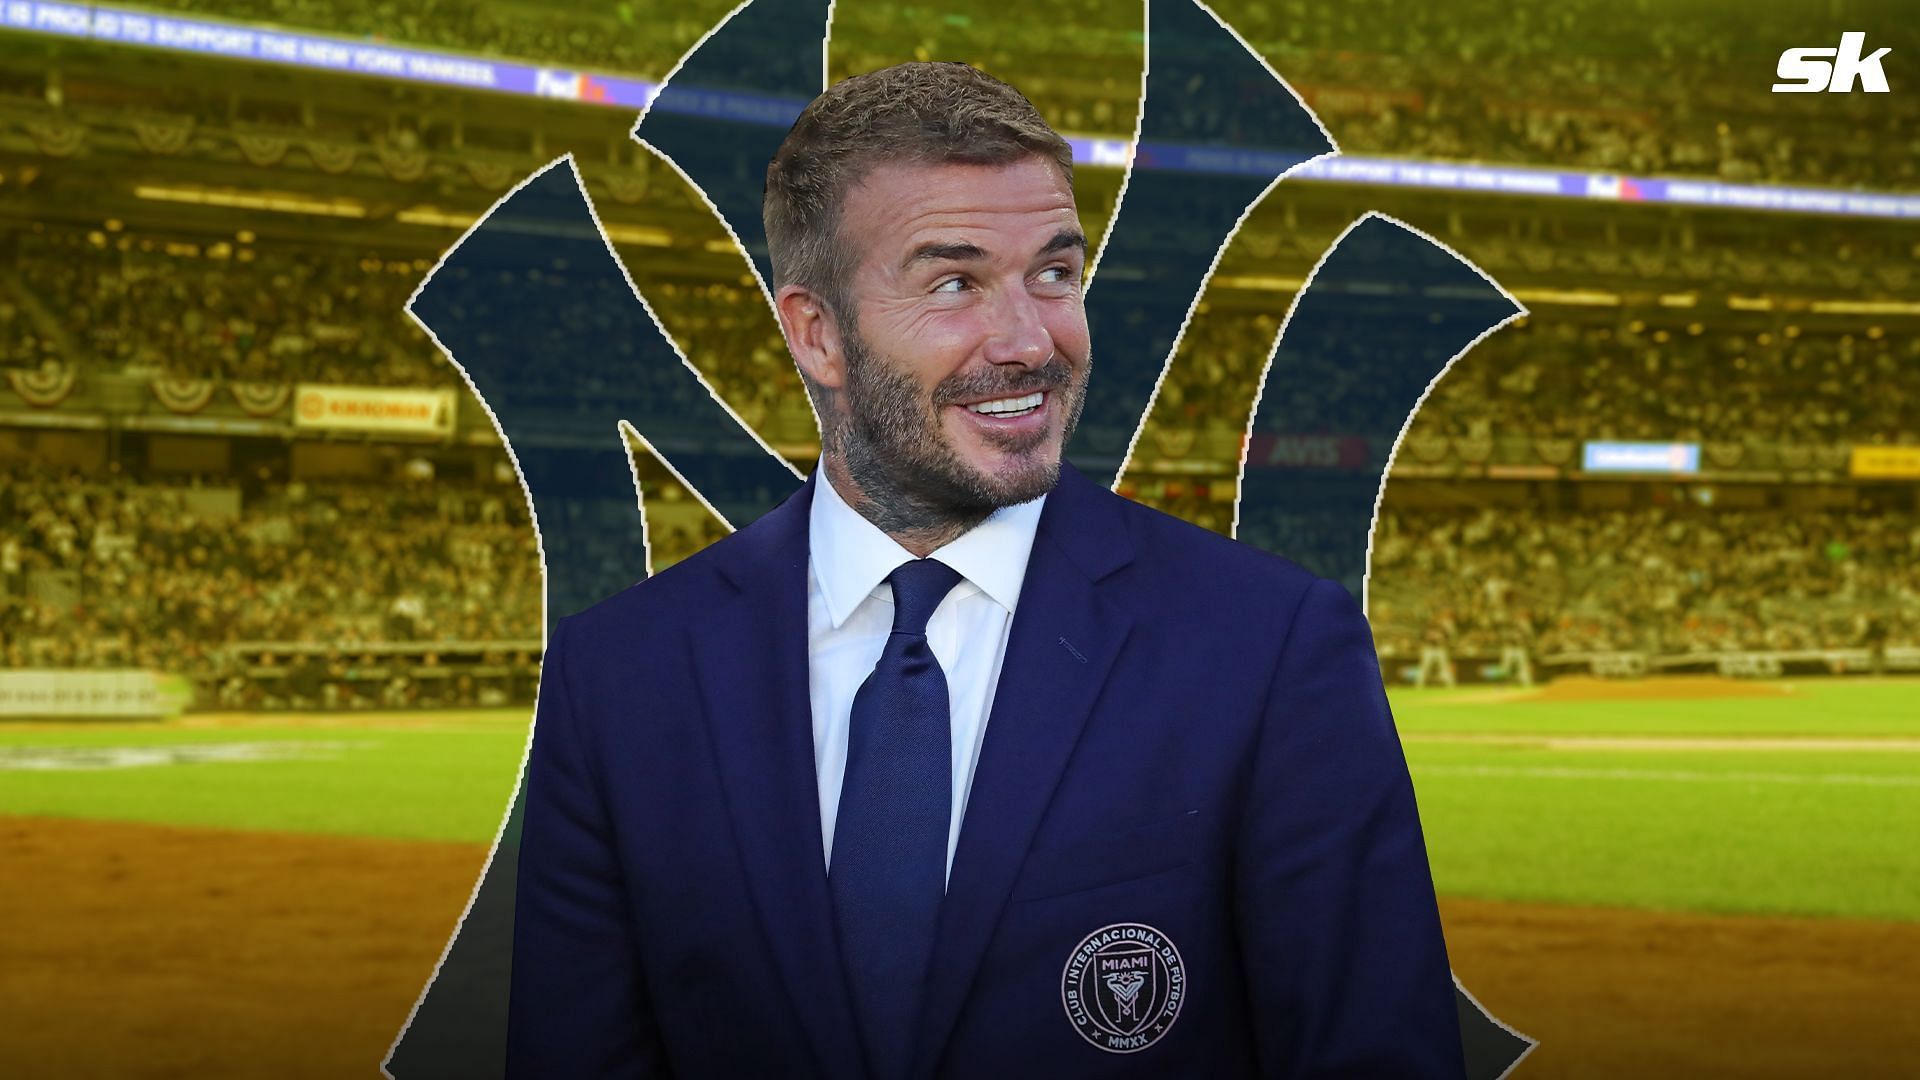 Inter Miami owner David Beckham wants to take his club to a brand like New York Yankees